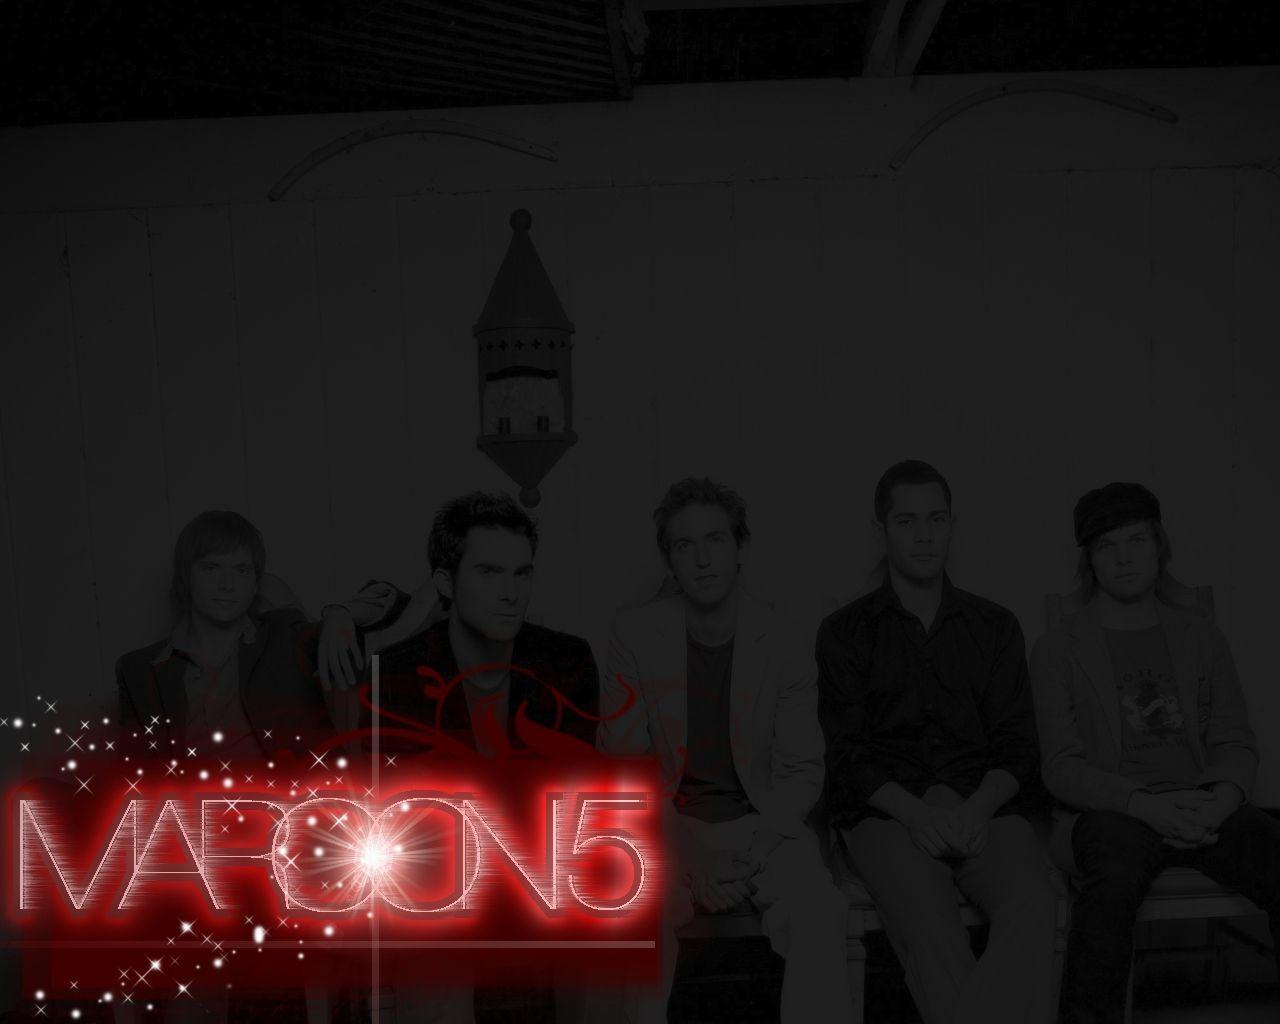 Gorgeous Maroon 5 Wallpaper. Full HD Picture